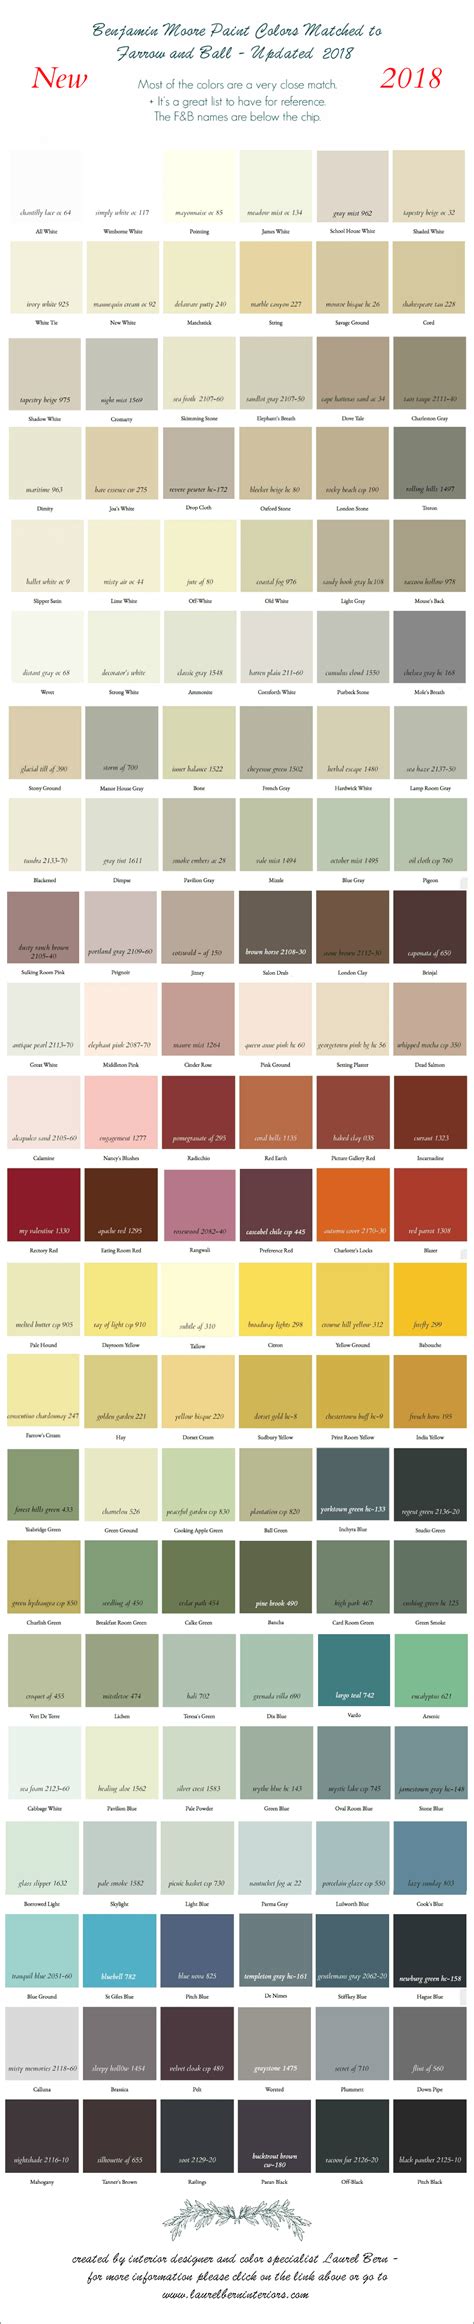 Farrow And Ball Colors Update 2018 Matching Laurel Home